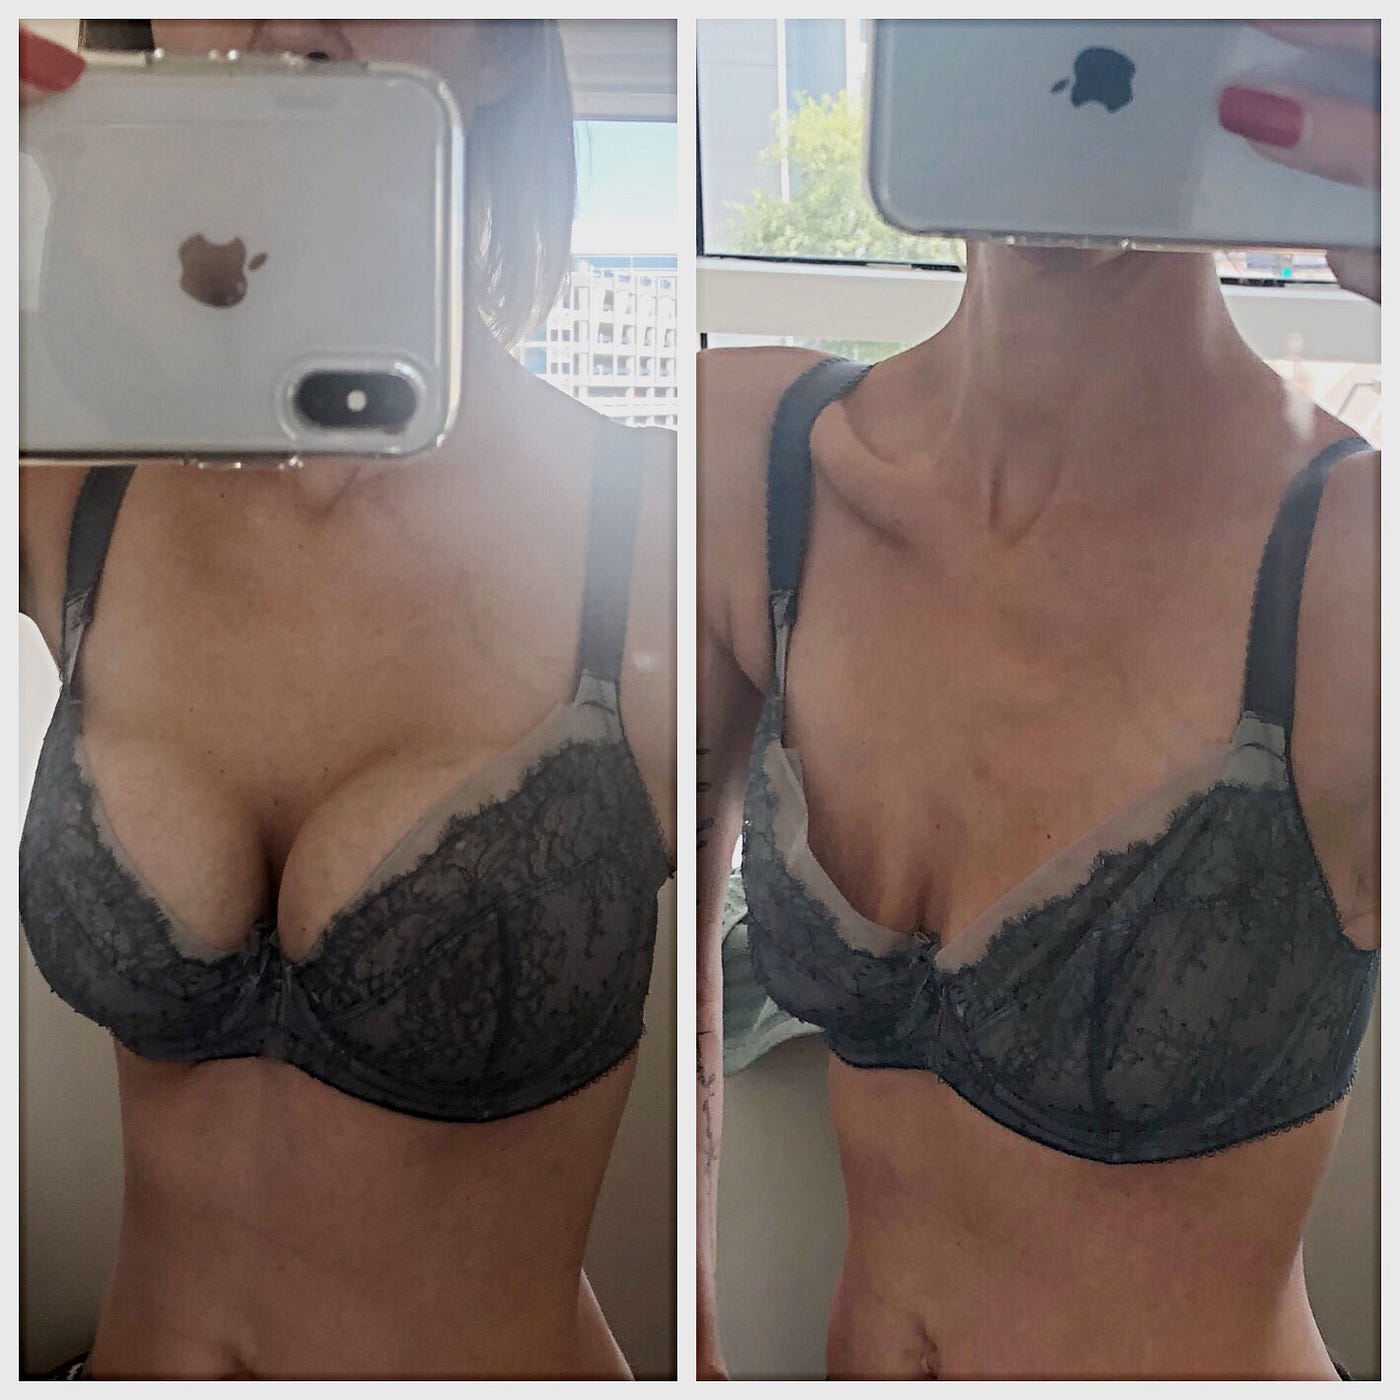 What Happened When I Had My Breast Implants Removed, by Upvirket